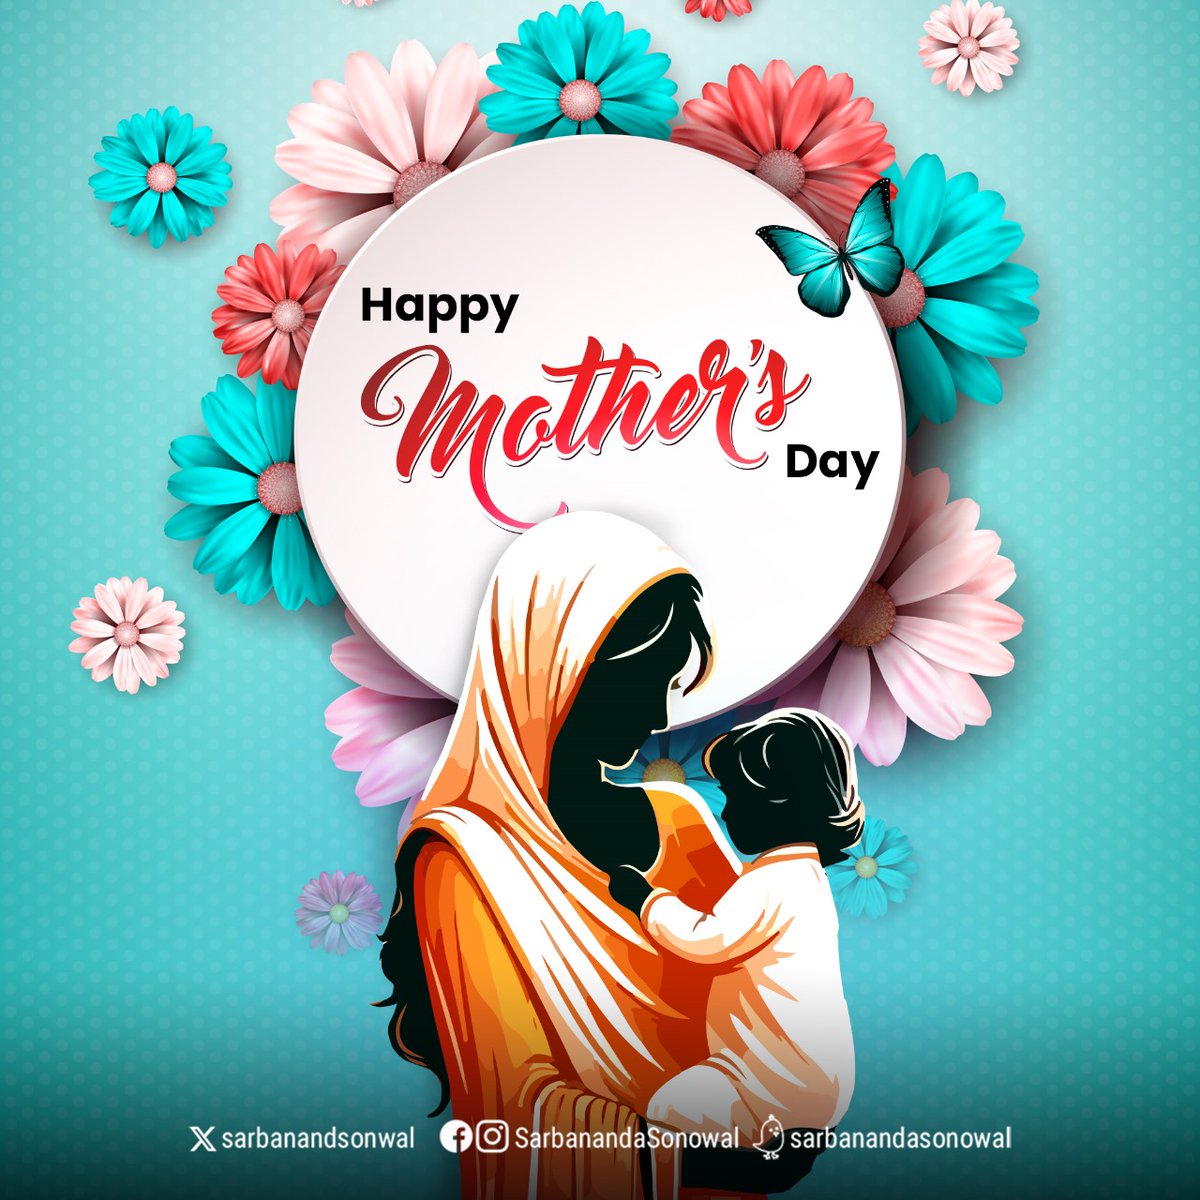 Greetings on #MothersDay! The eternal source of love, learning and life, the selfless sacrifice of mothers shapes the world & society. My salutations on this special occasion.